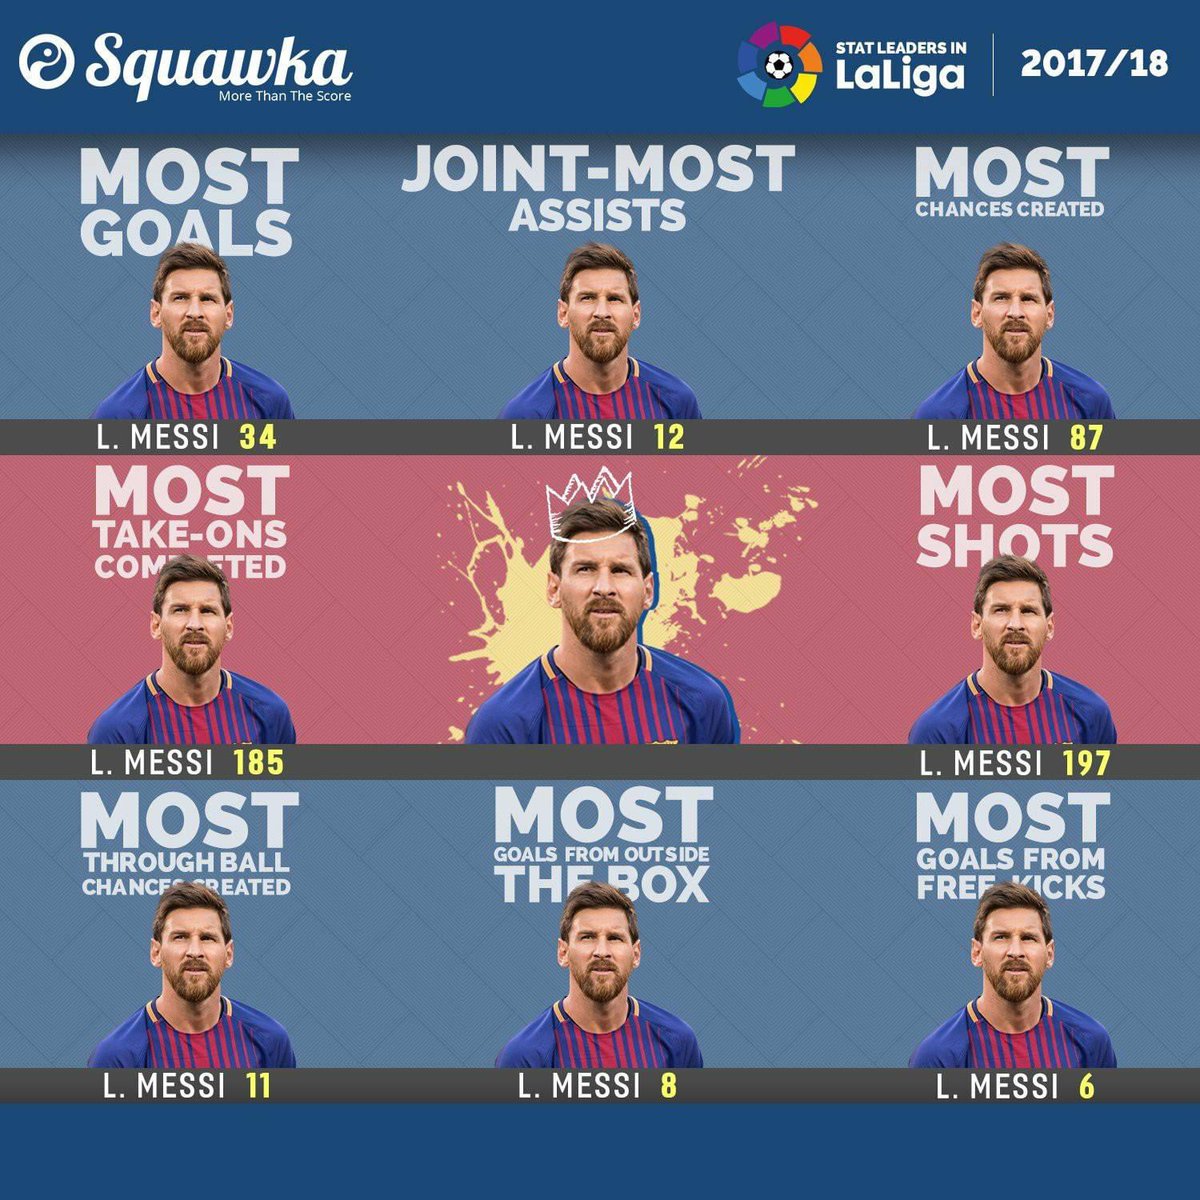 Just a reminder that Lionel Messi has an undefeated league season in 17/18. Messi did not play the only game that Barcelona lost that season.